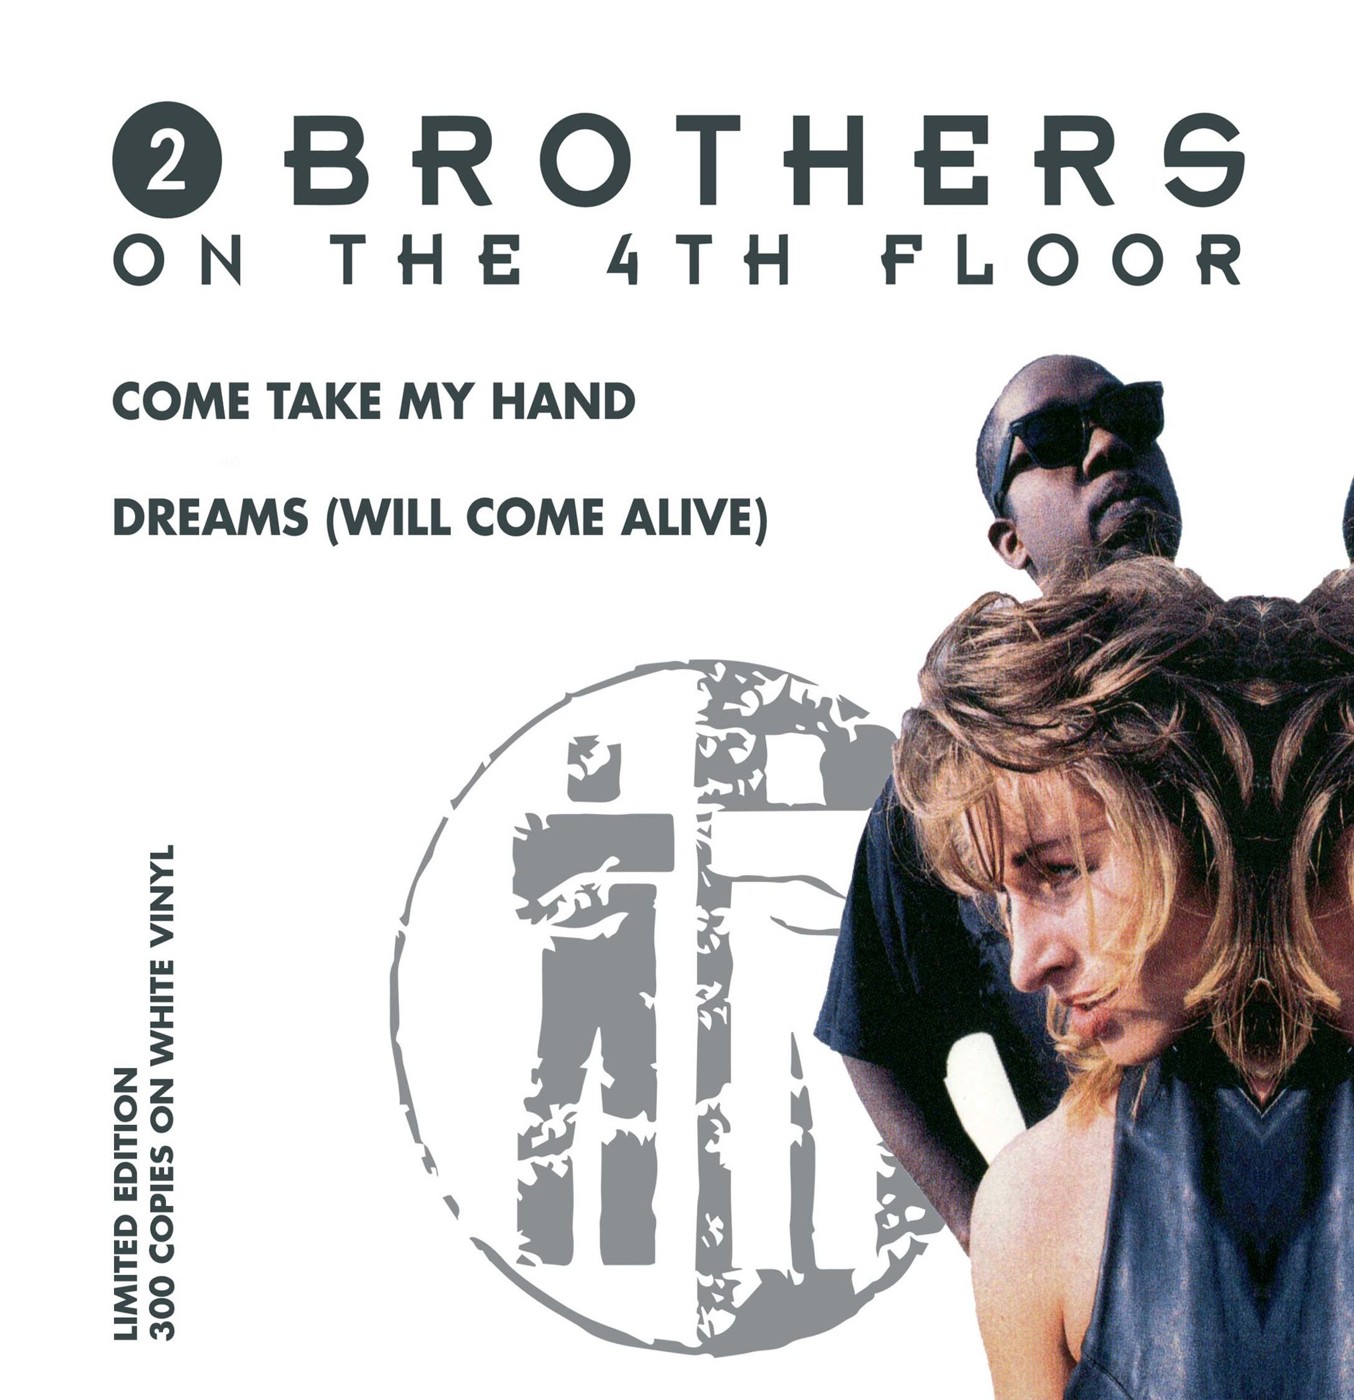 Песни brothers on the 4th floor. 2 Brothers on the 4th Floor Dreams 1994. Группа 2 brothers on the 4th Floor. 2 Brothers on the 4th Floor - Dreams (will come Alive). "Come take my hand".